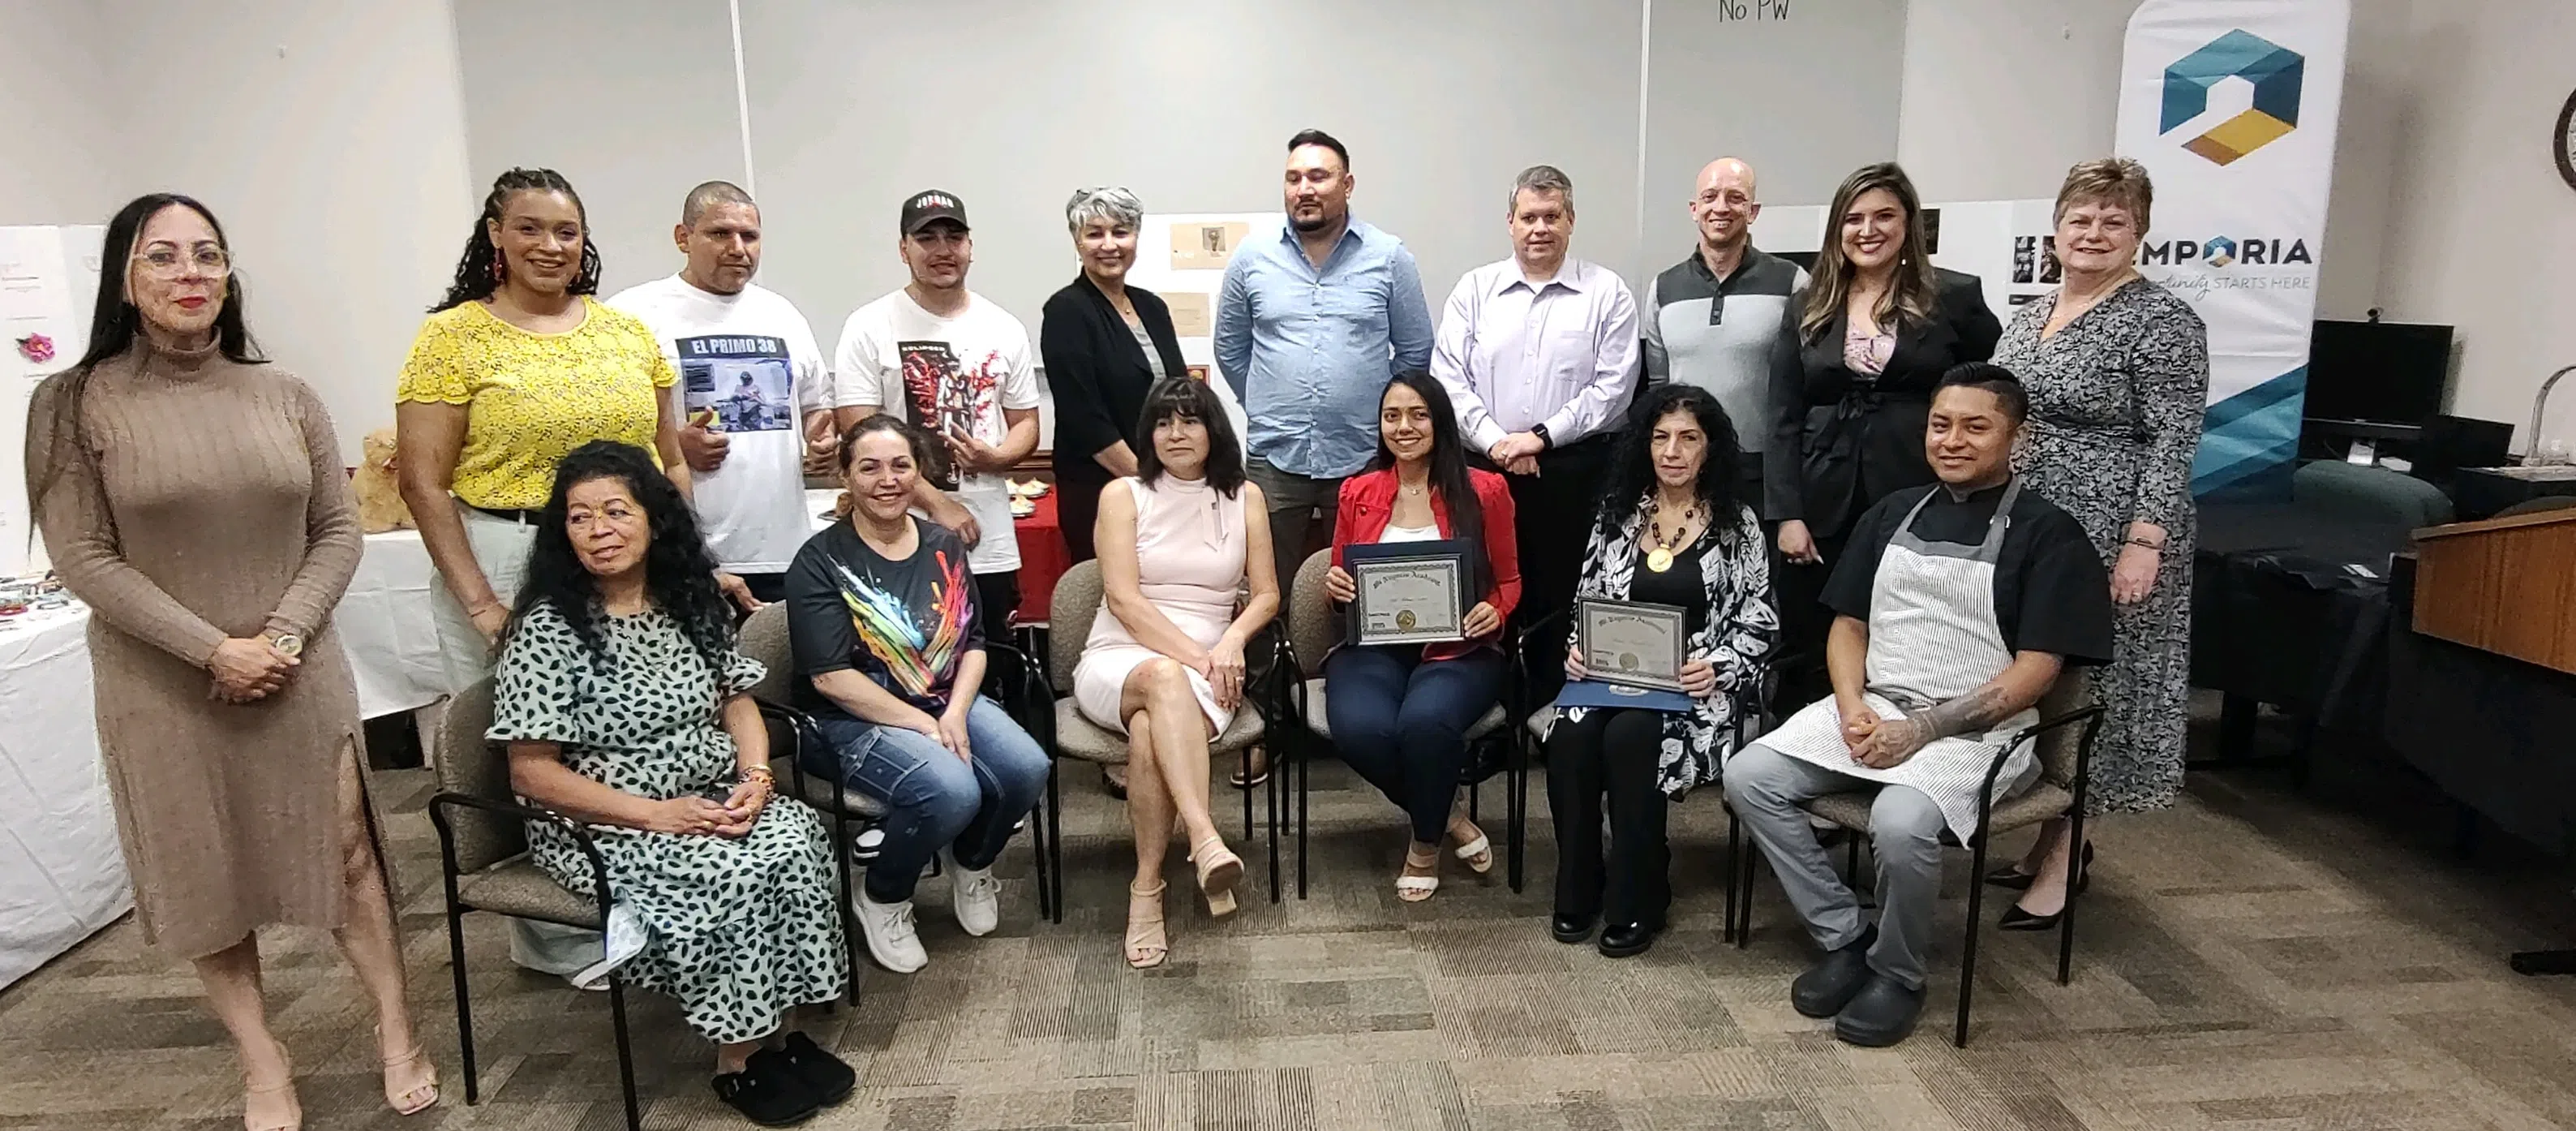 'A great day for Emporia:' Trusler Business Center plays host to inaugural Mi Negocio Academy graduation ceremony Wednesday afternoon